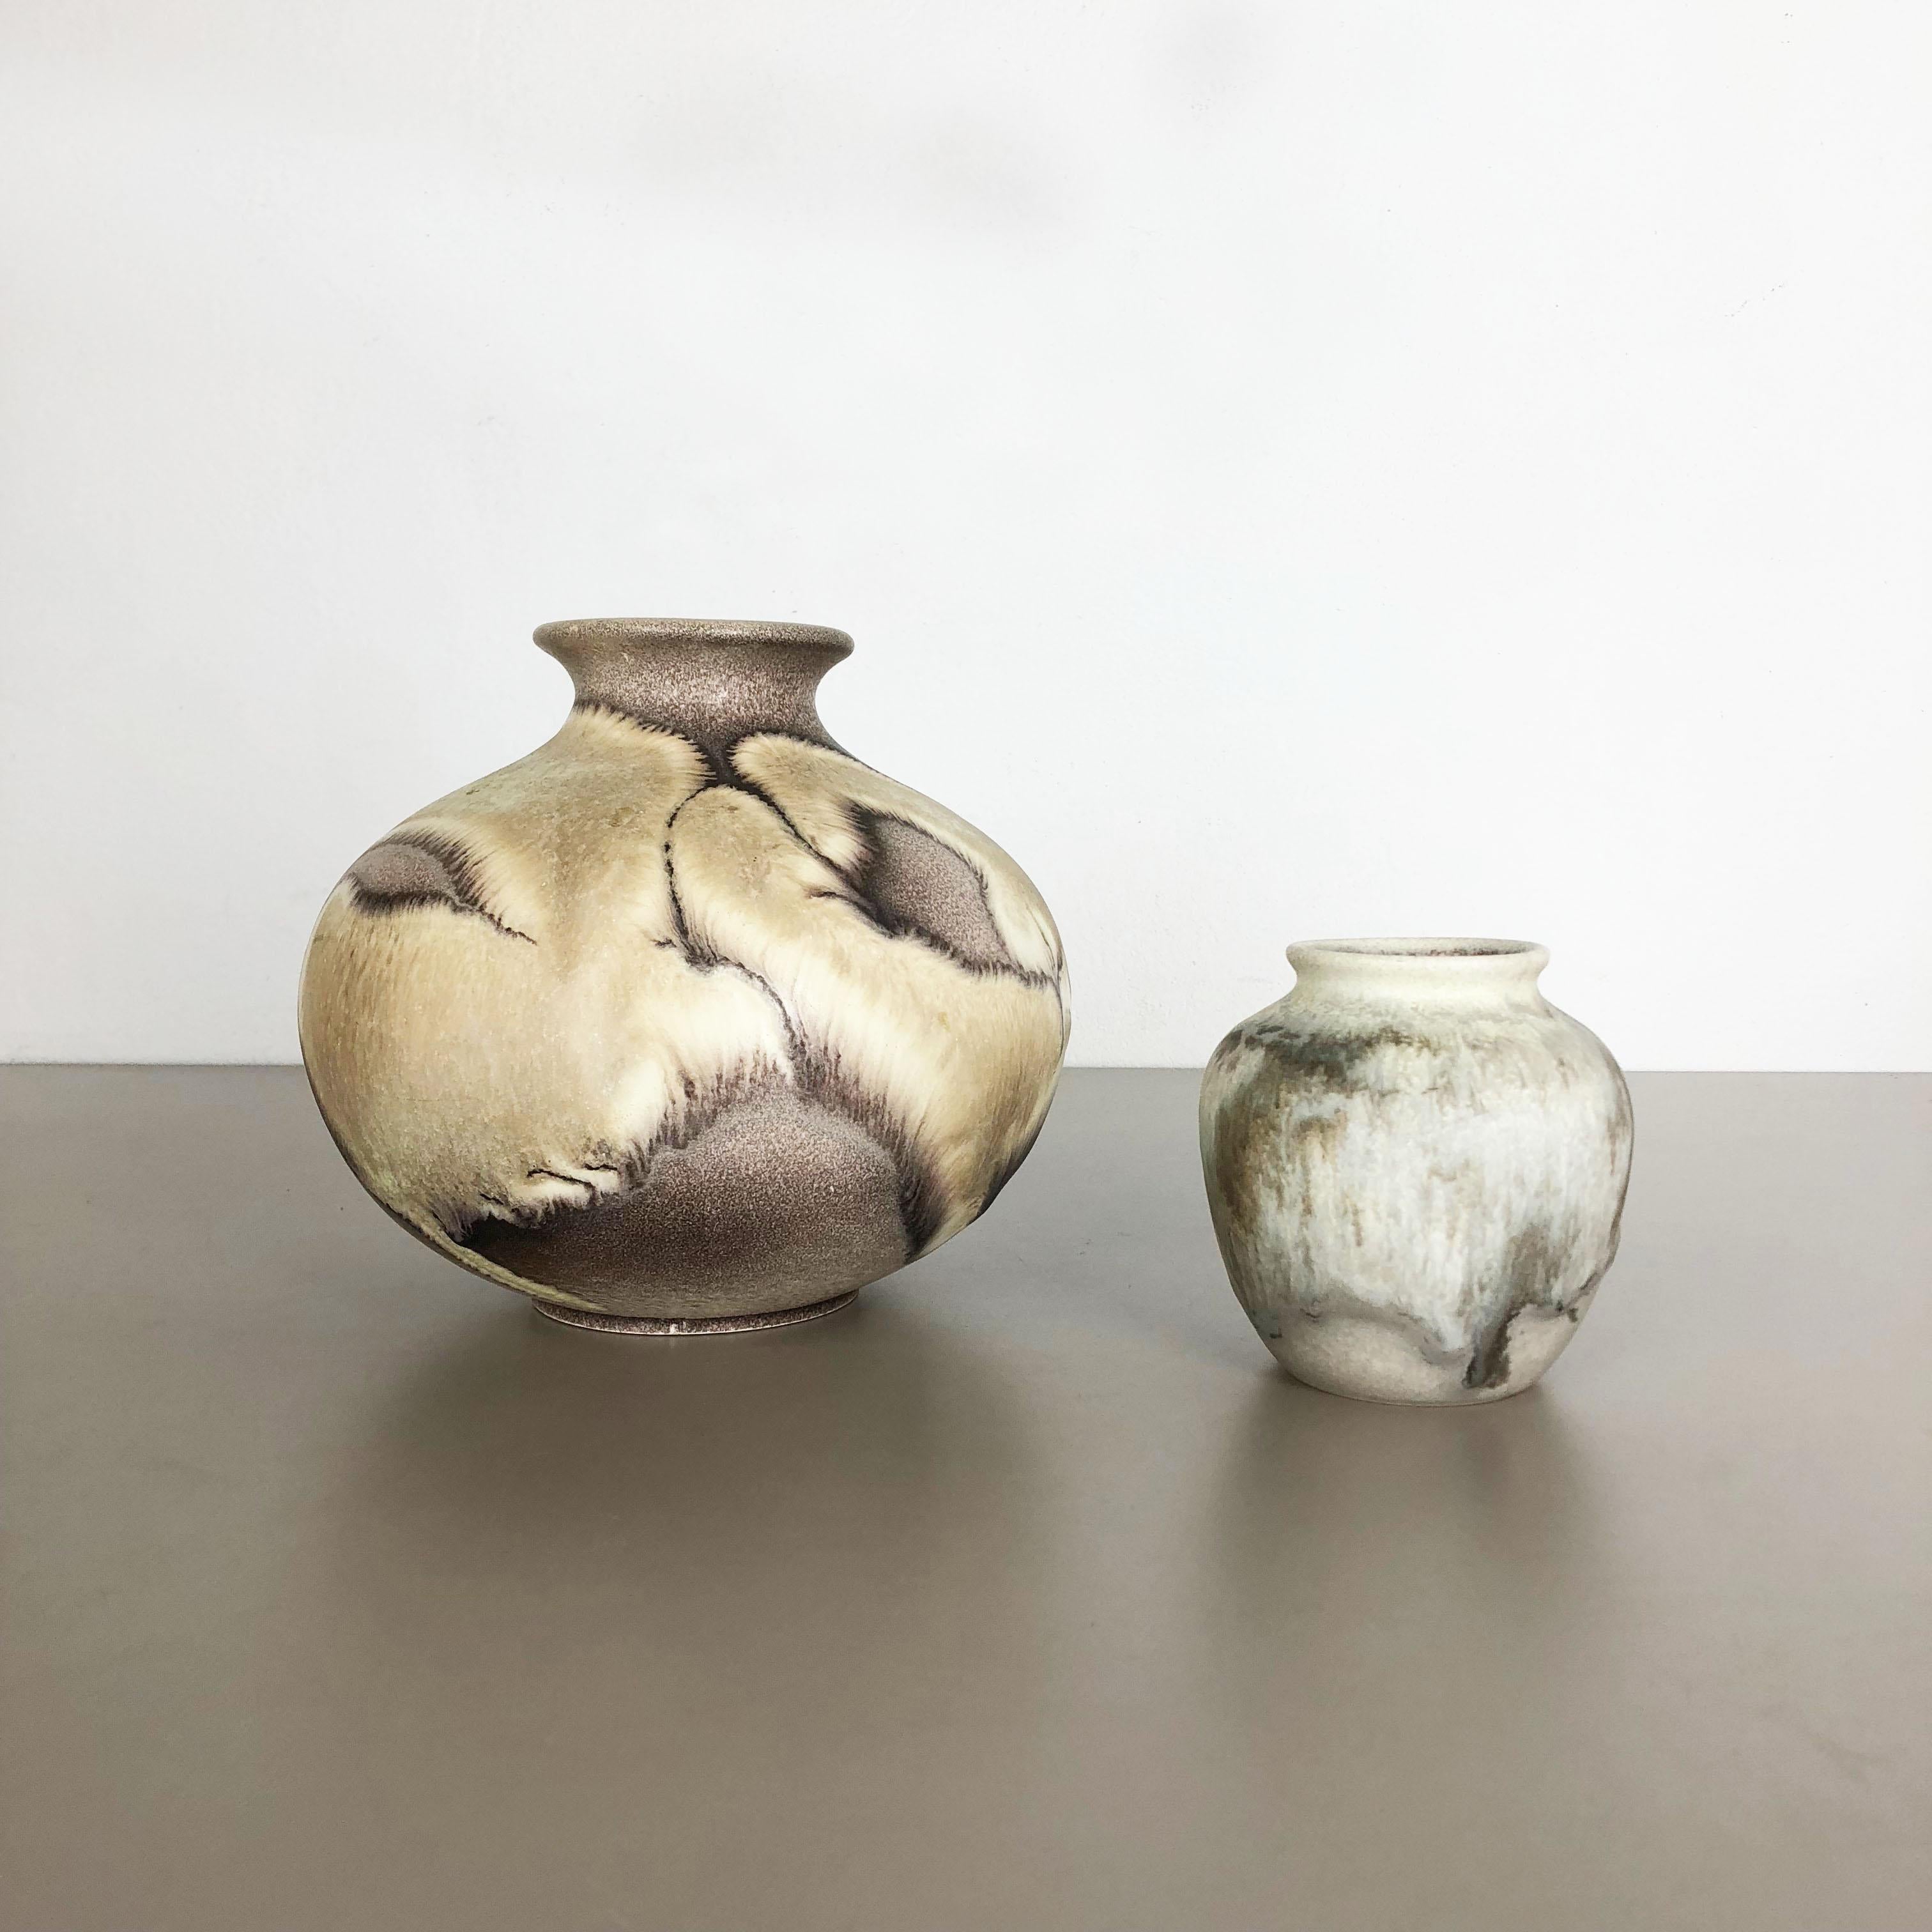 Article:

Set of 2 vases


Producer:

Ruscha, Germany



Decade:

1960s


This original vintage vase set was designed and produced in the 1960s by Ruscha in Germany. This offer contains a set of two multi-color vases in typical